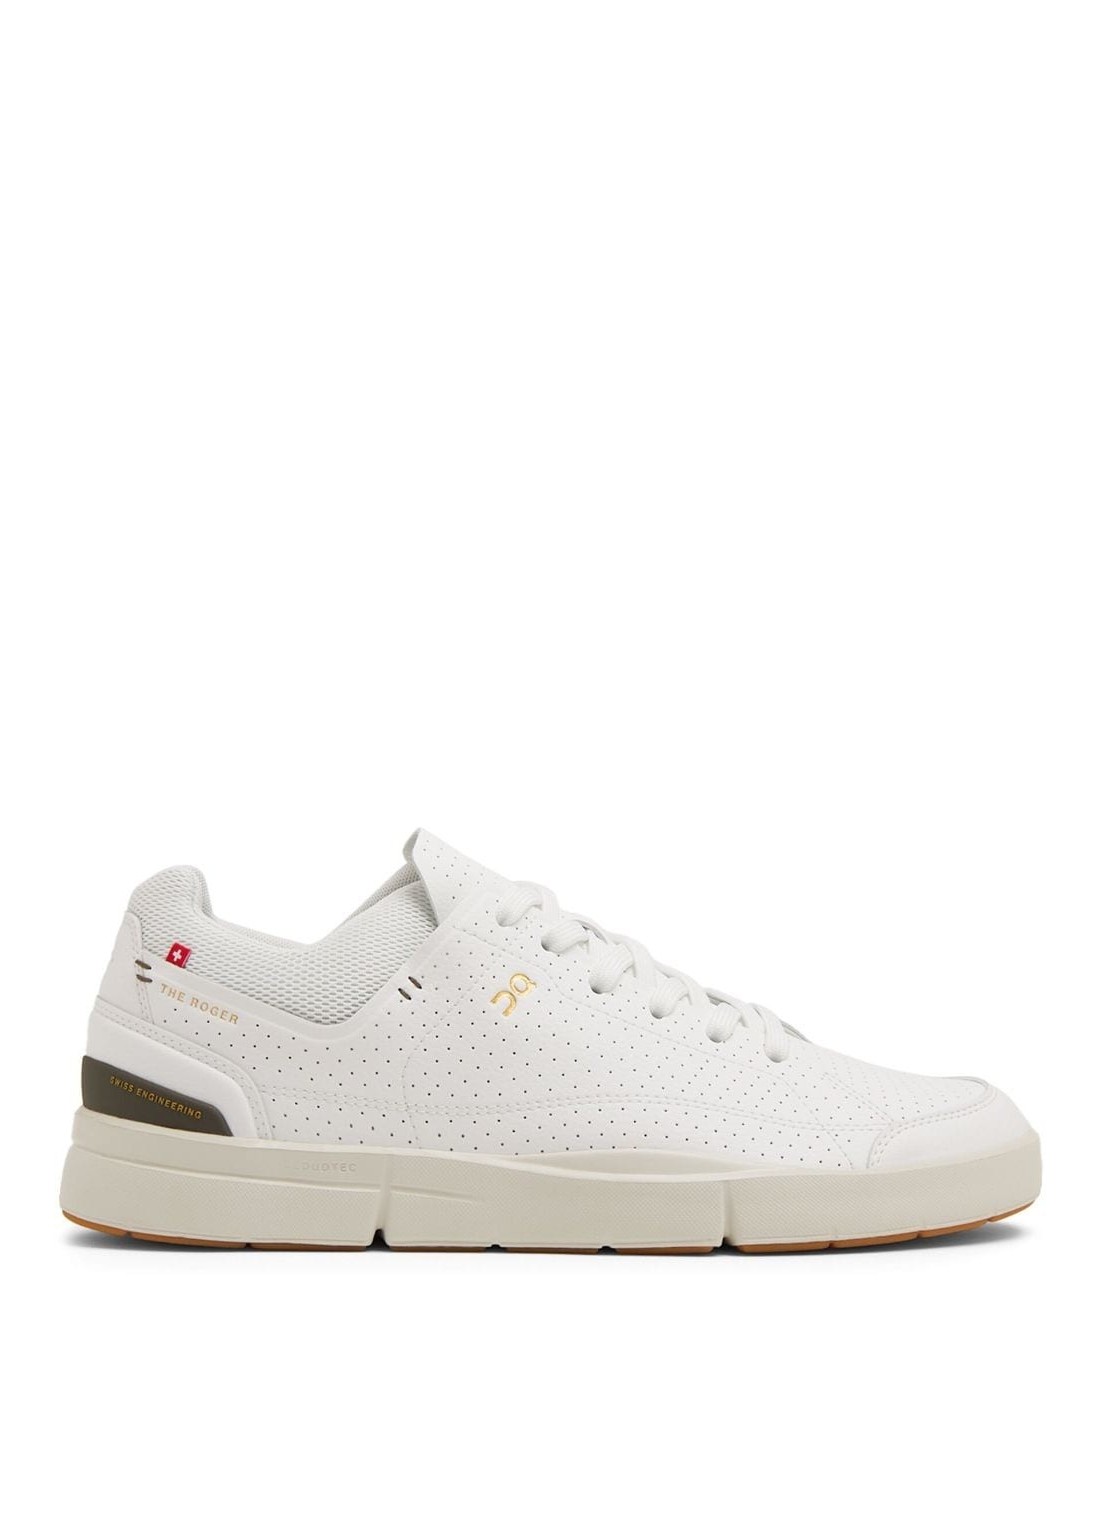 Sneaker on running the roger centre court - 3md30241528 white olive talla 41
 